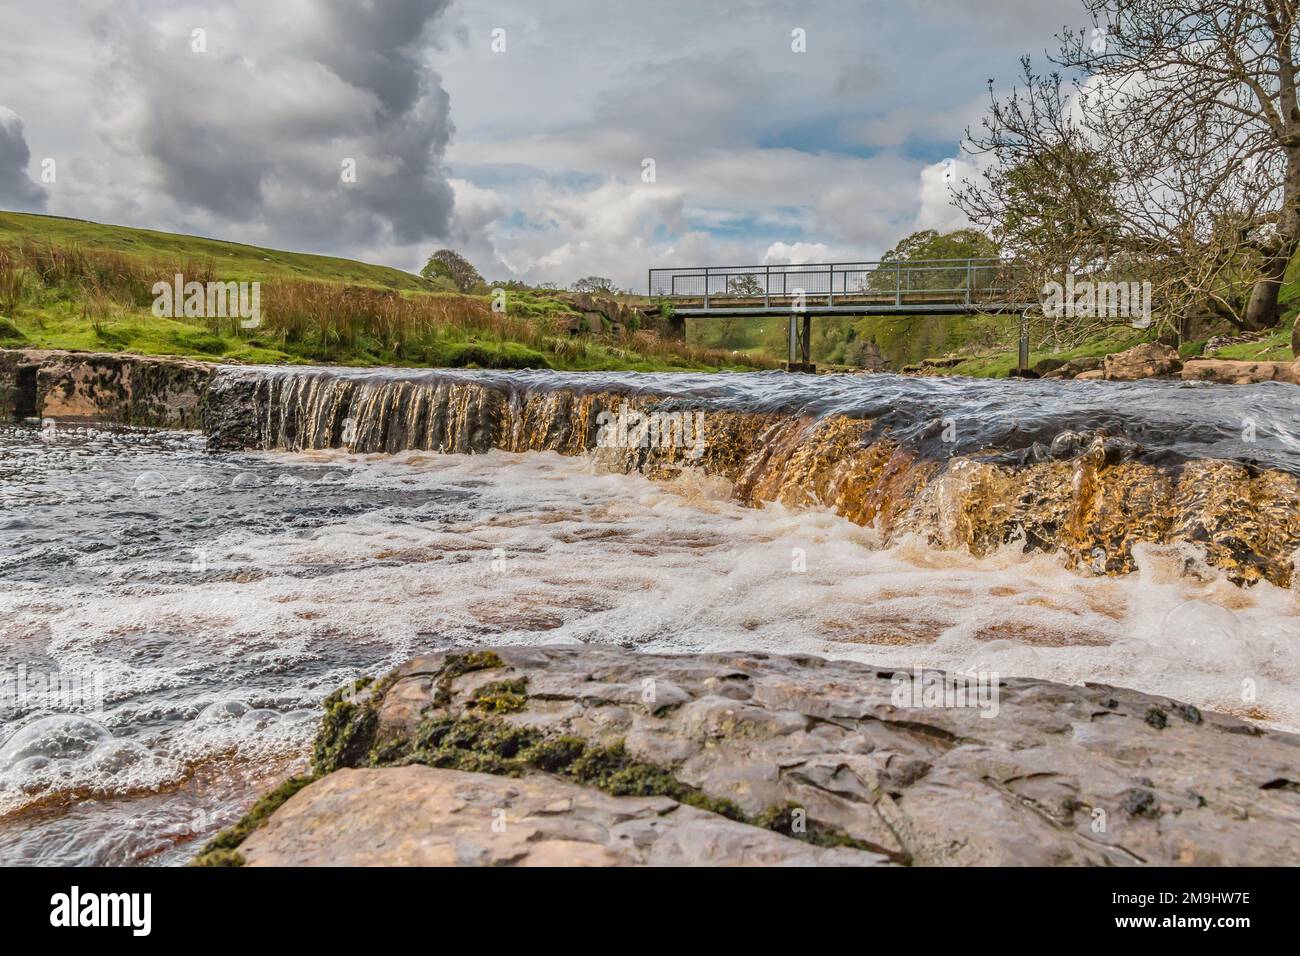 Cascade and footbridge over Sleightholme Beck, East Mellwaters, Bowes. The Pennine Way long distance footpath passes close by. Stock Photo